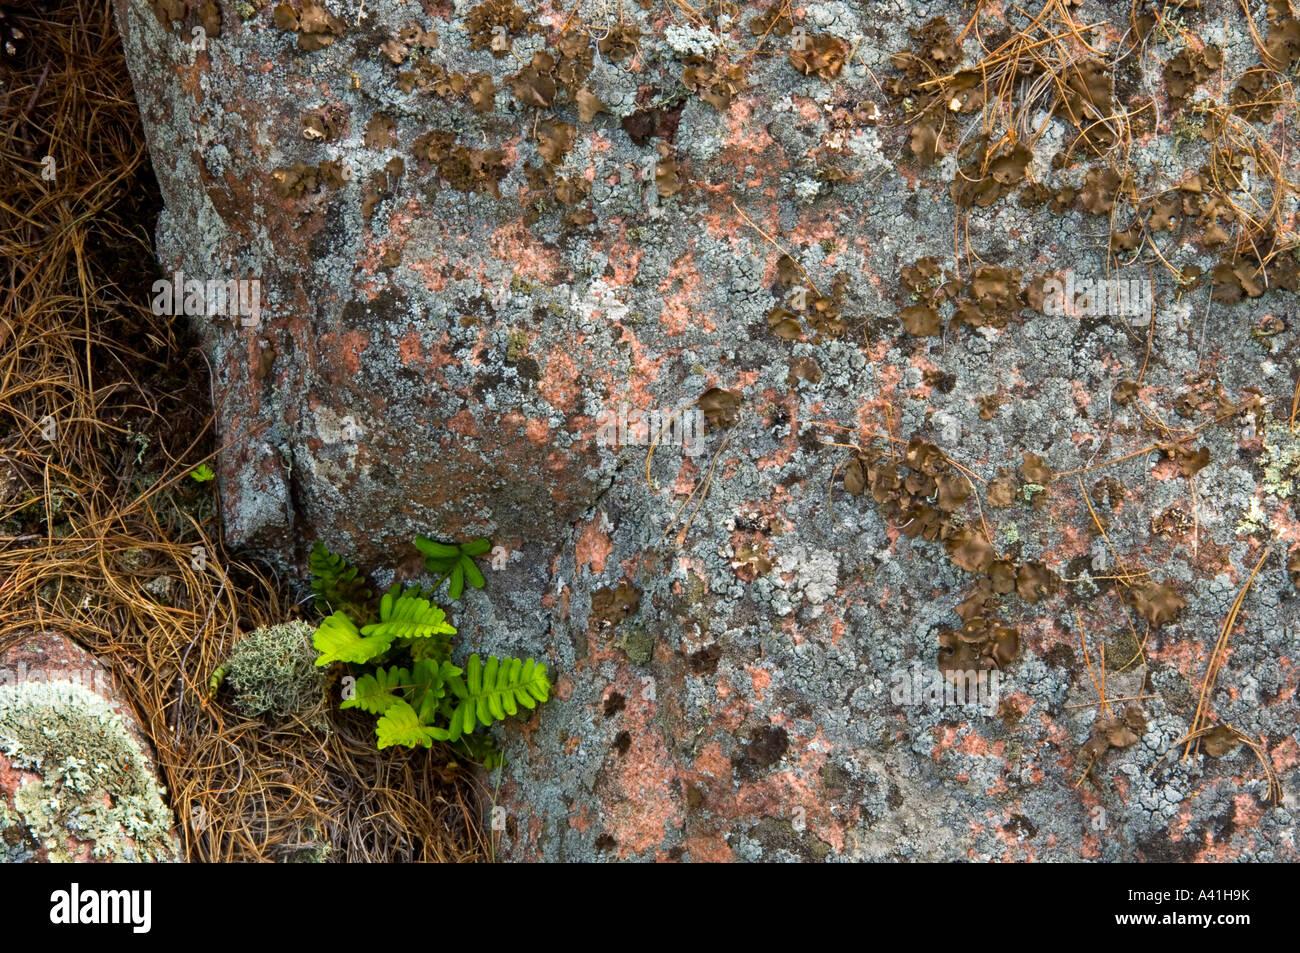 Small fern and lichen covered rock in woodlands, on George Island Killarney, Ontario, Canada Stock Photo